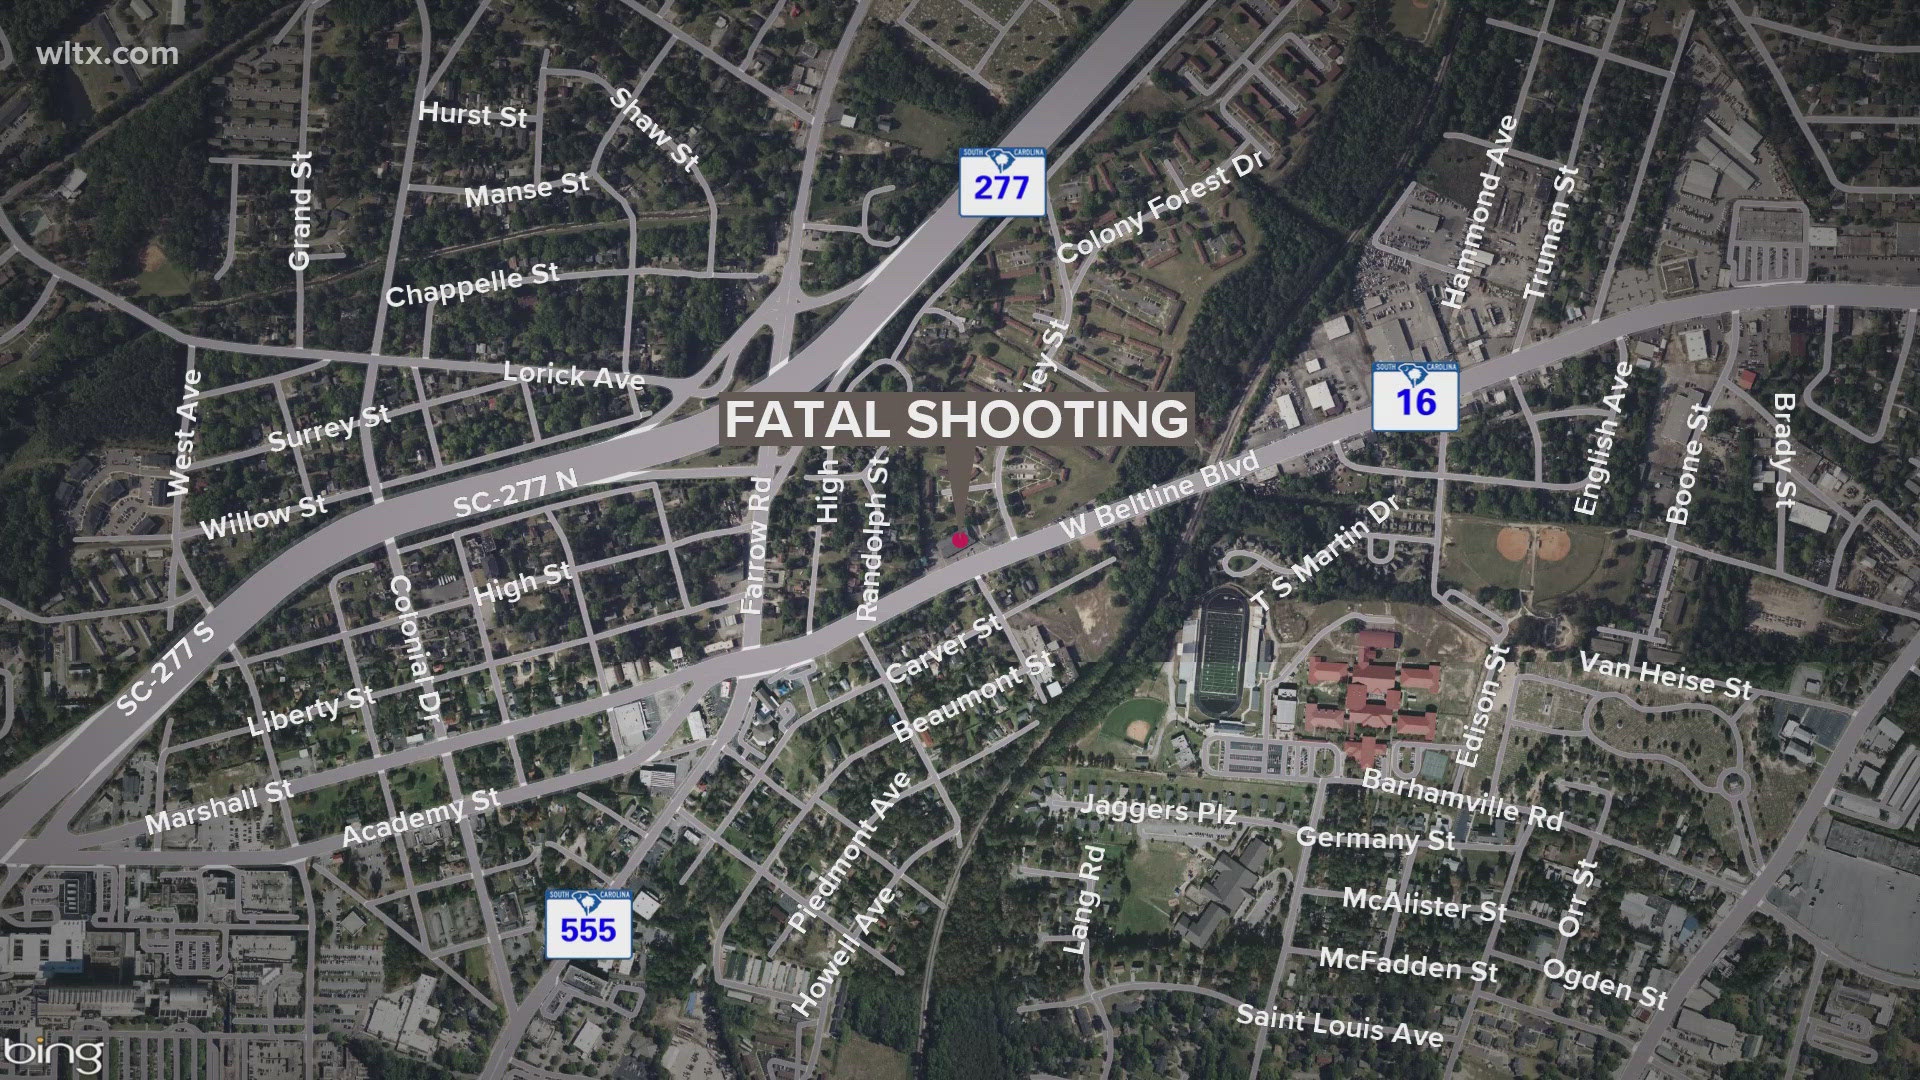 Authorities said the shooting happened at Colony Apartments around 1:30 a.m.